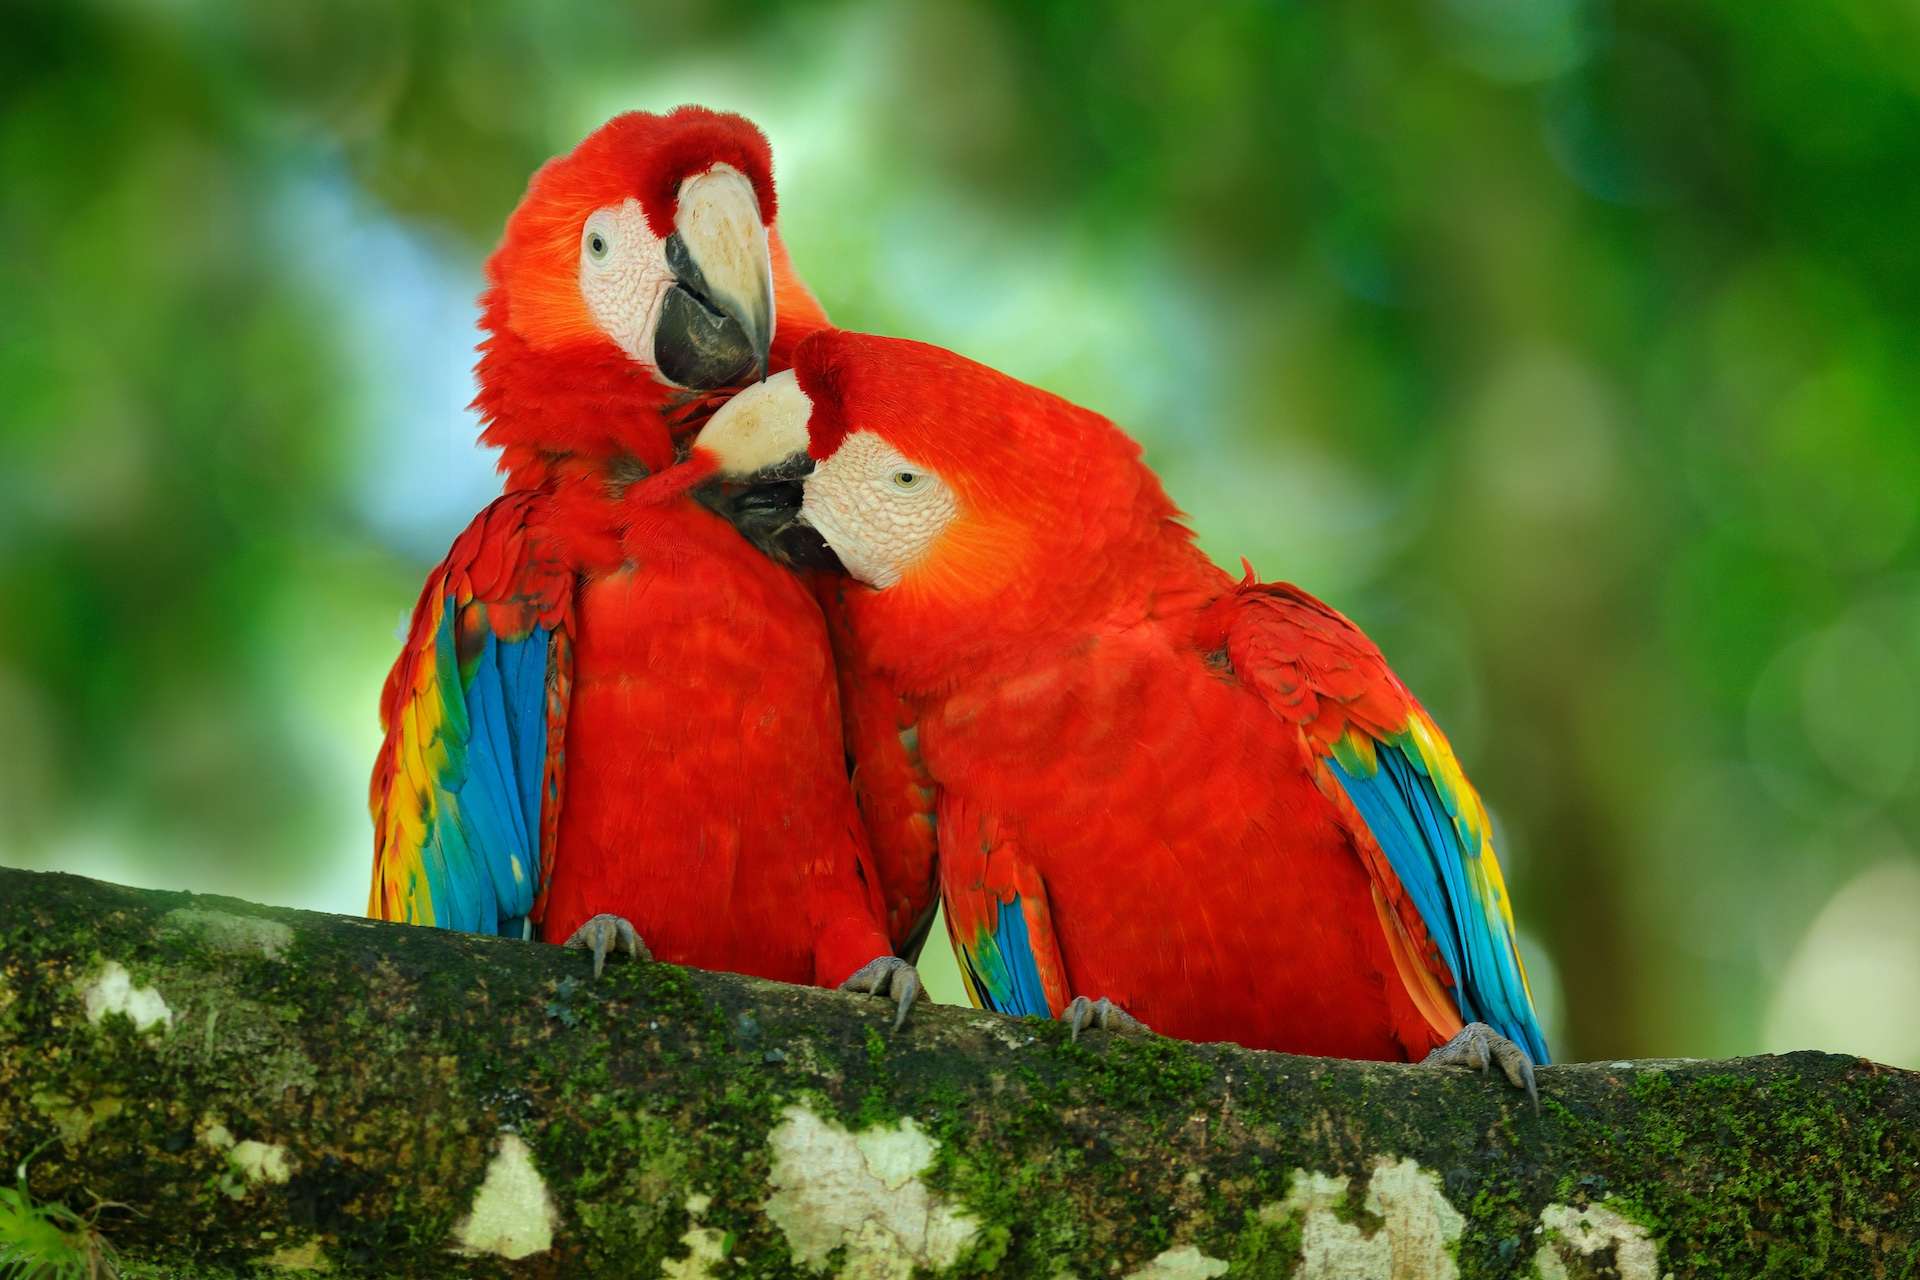 Pair of big Scarlet Macaws, Ara macao, two birds sitting on the branch, Costa rica. Wildlife love scene from tropical forest. Two beautiful parrots on tree branch in nature habitat.